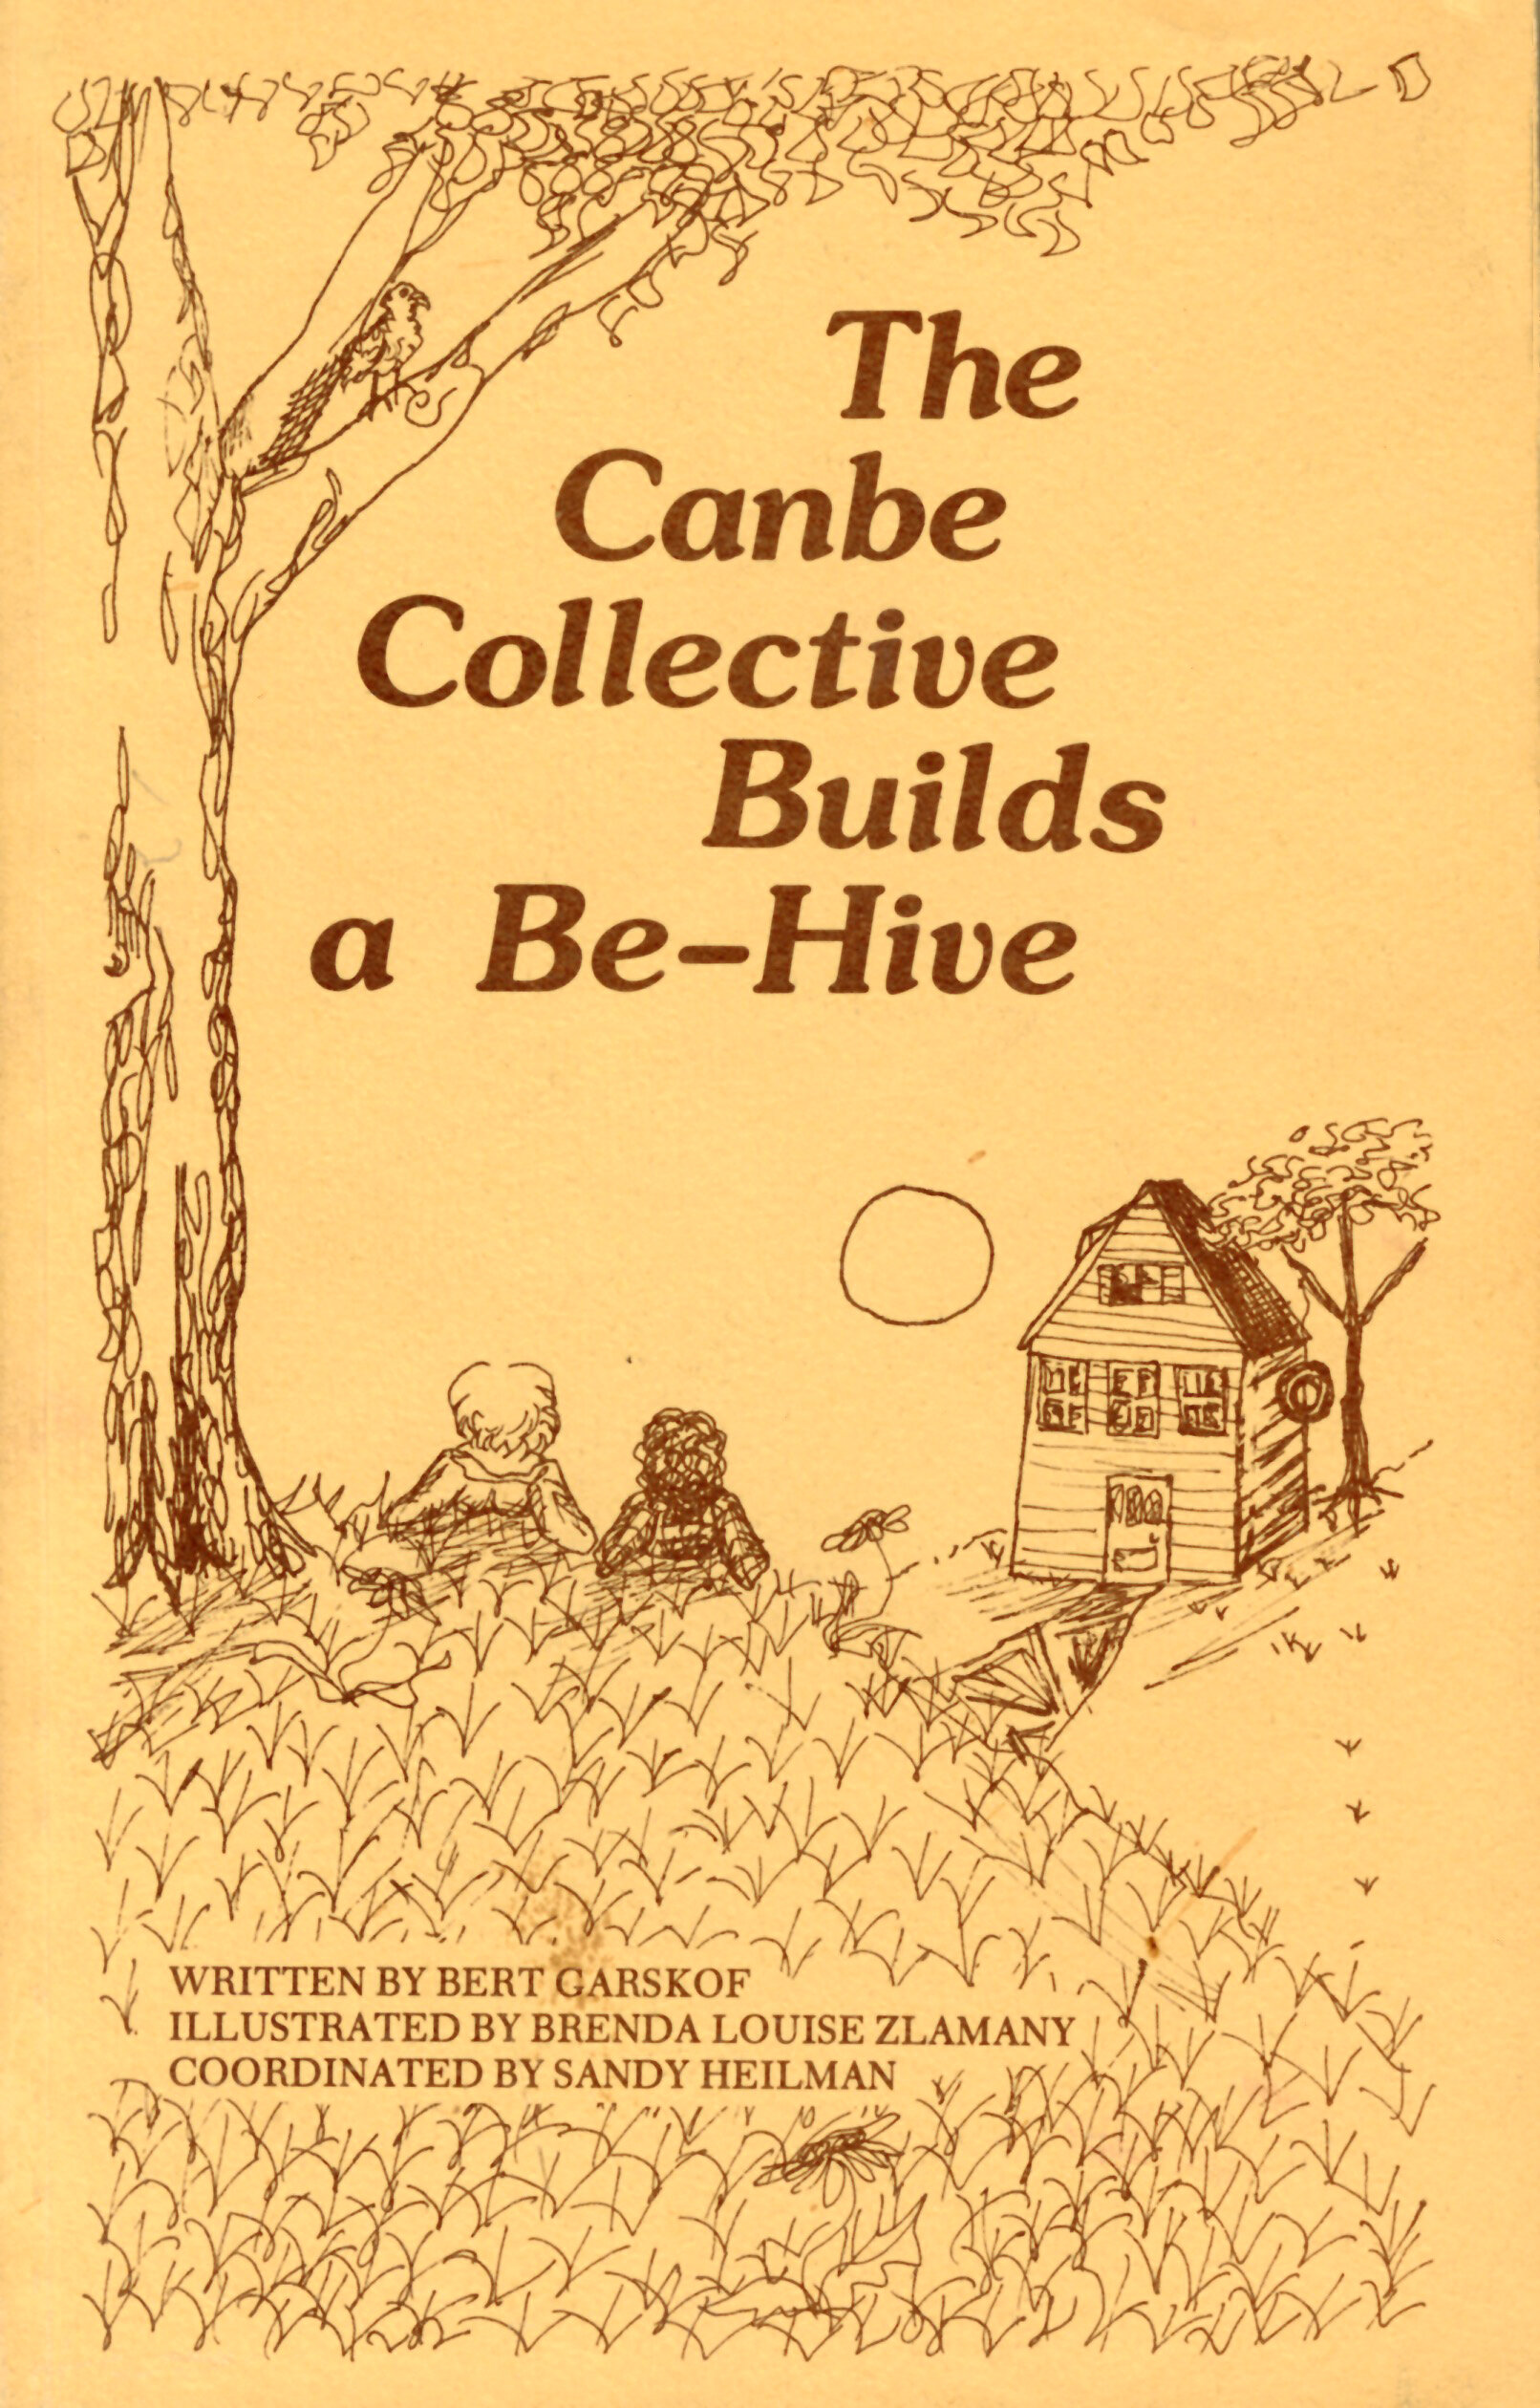 The Canbe Collective Builds a Be-Hive By Bert Garskof